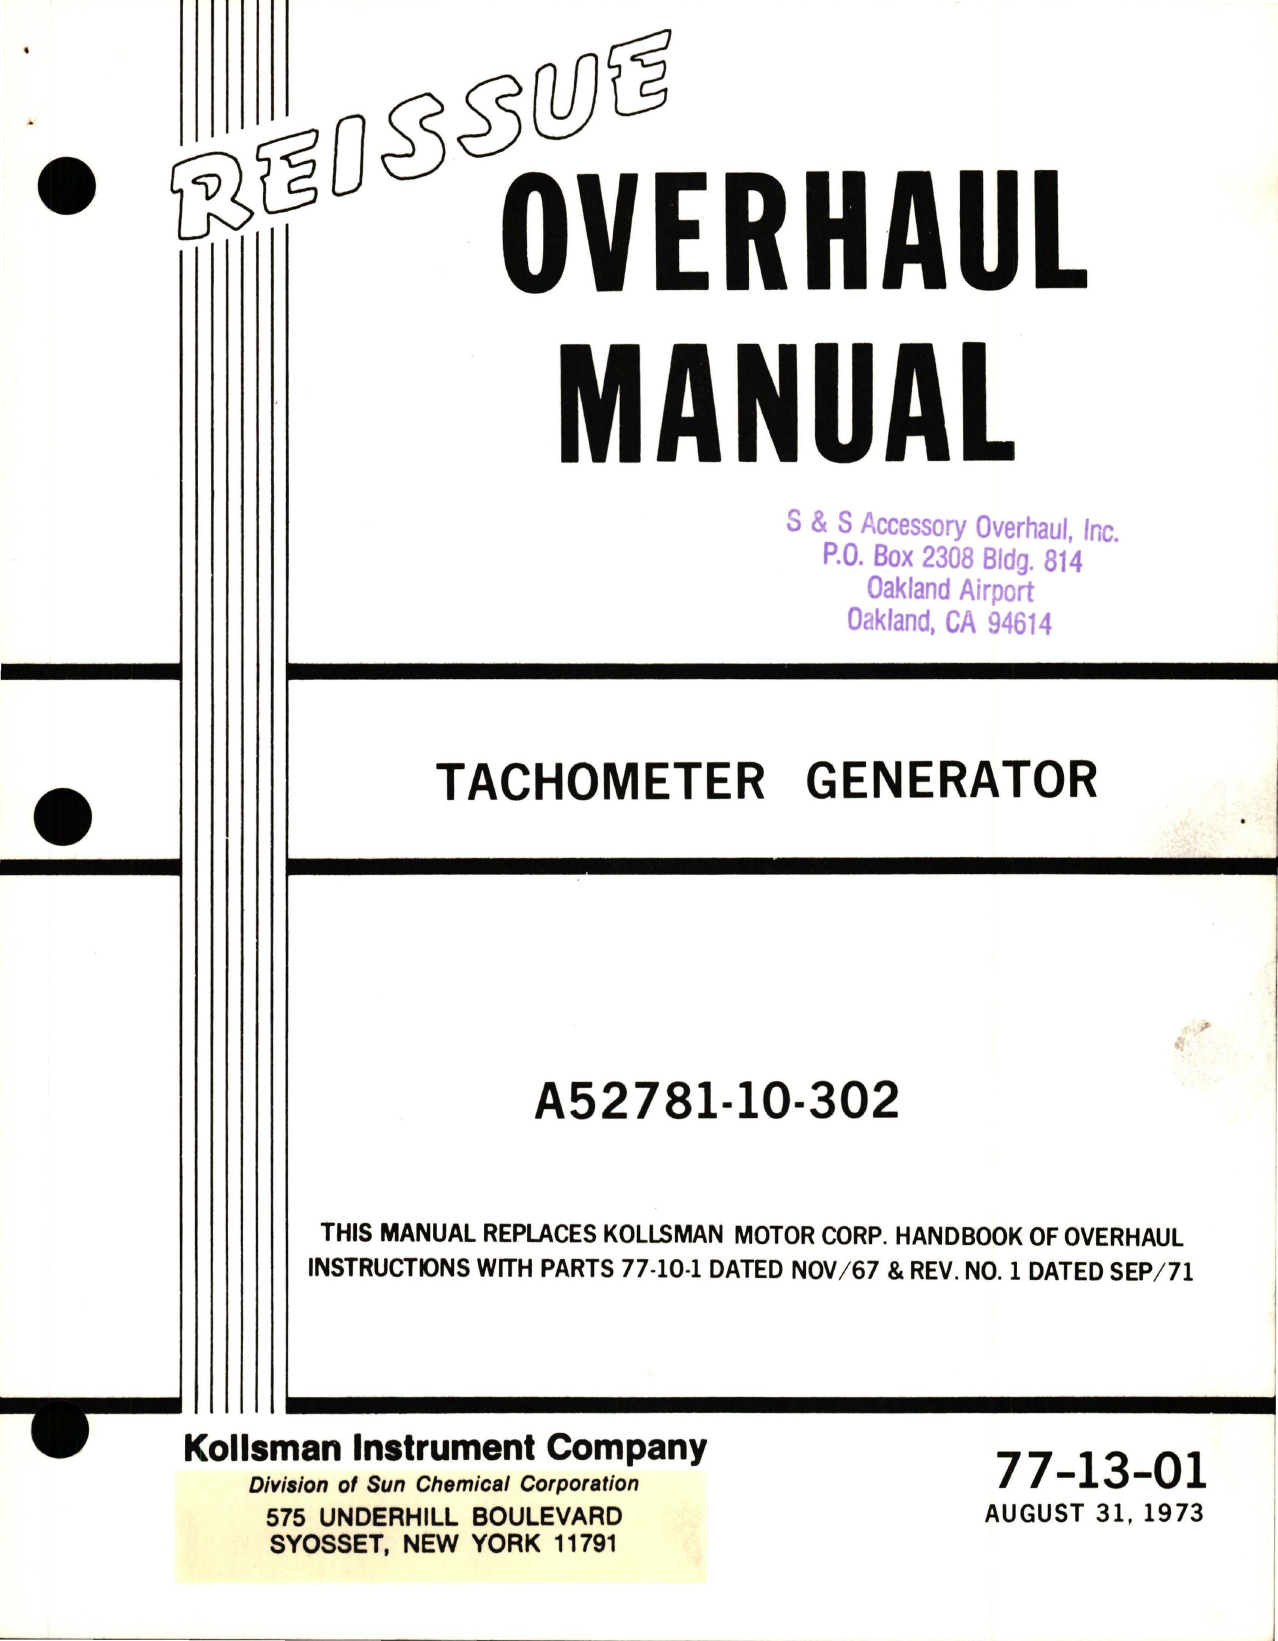 Sample page 1 from AirCorps Library document: Overhaul for Tachometer Generator - A52781-10-302